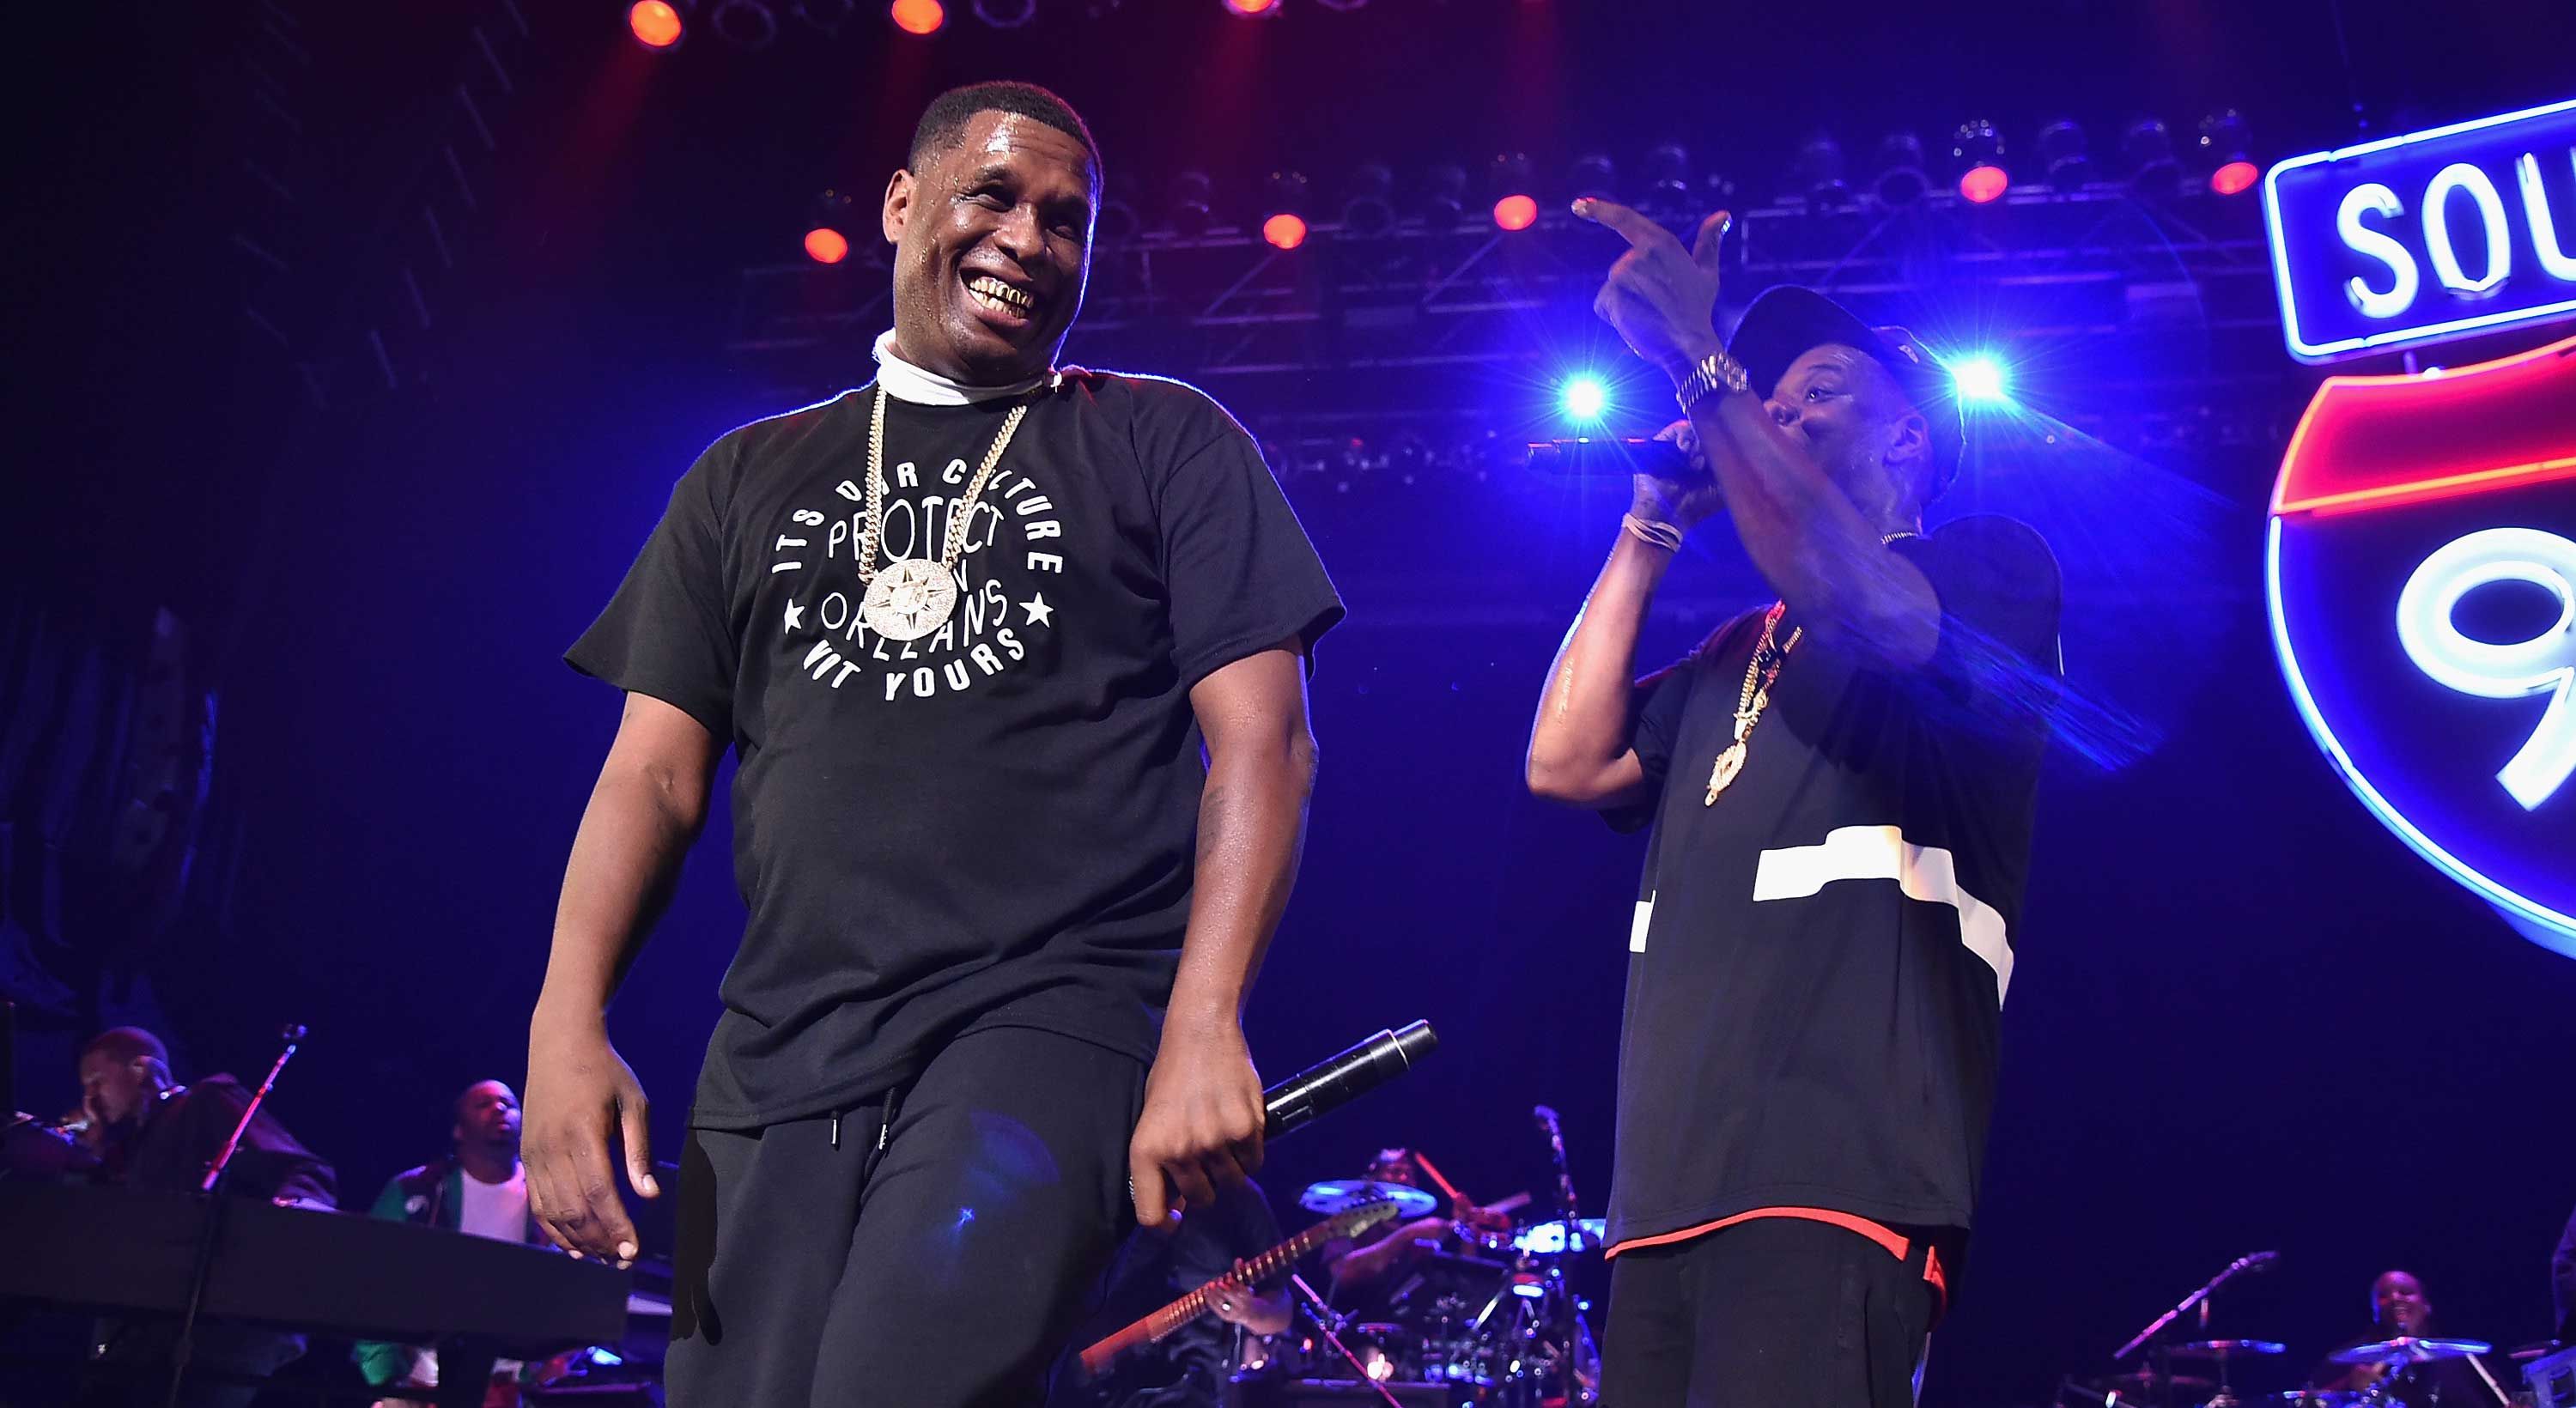 Jay-Z and Jay Electronica Lick Louis Farrakhan Up and Down